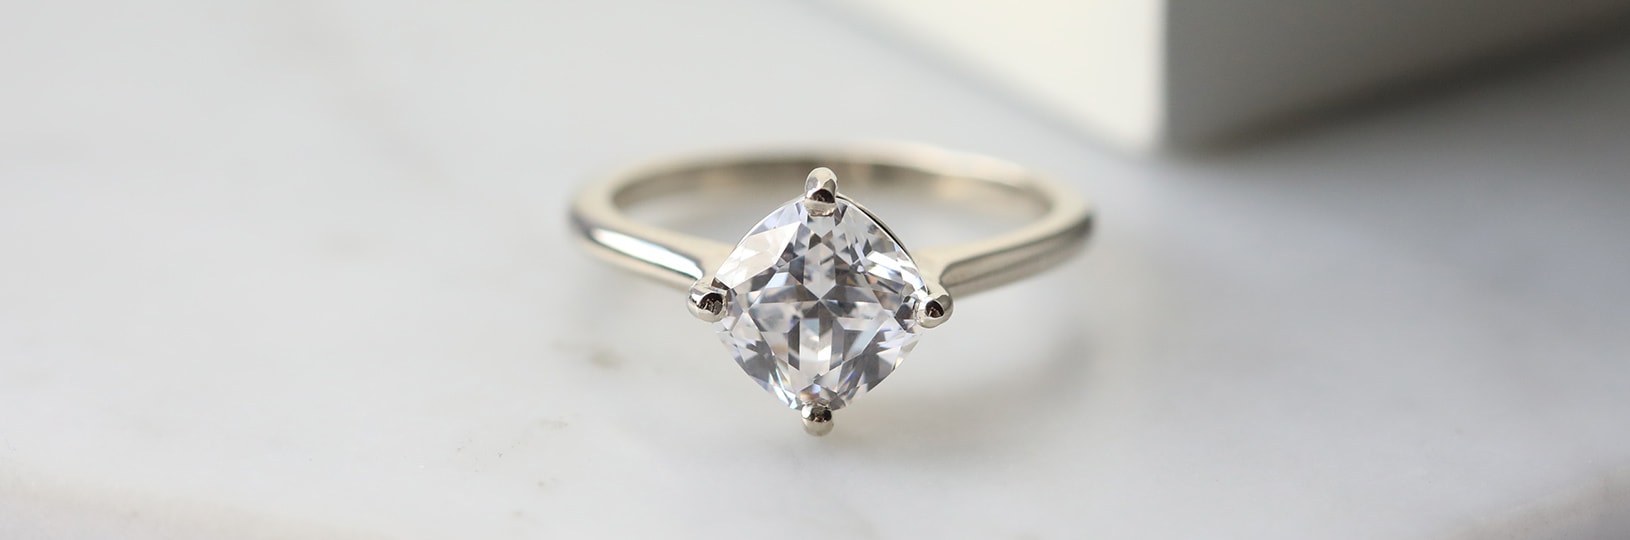 Image of a solitaire engagement ring